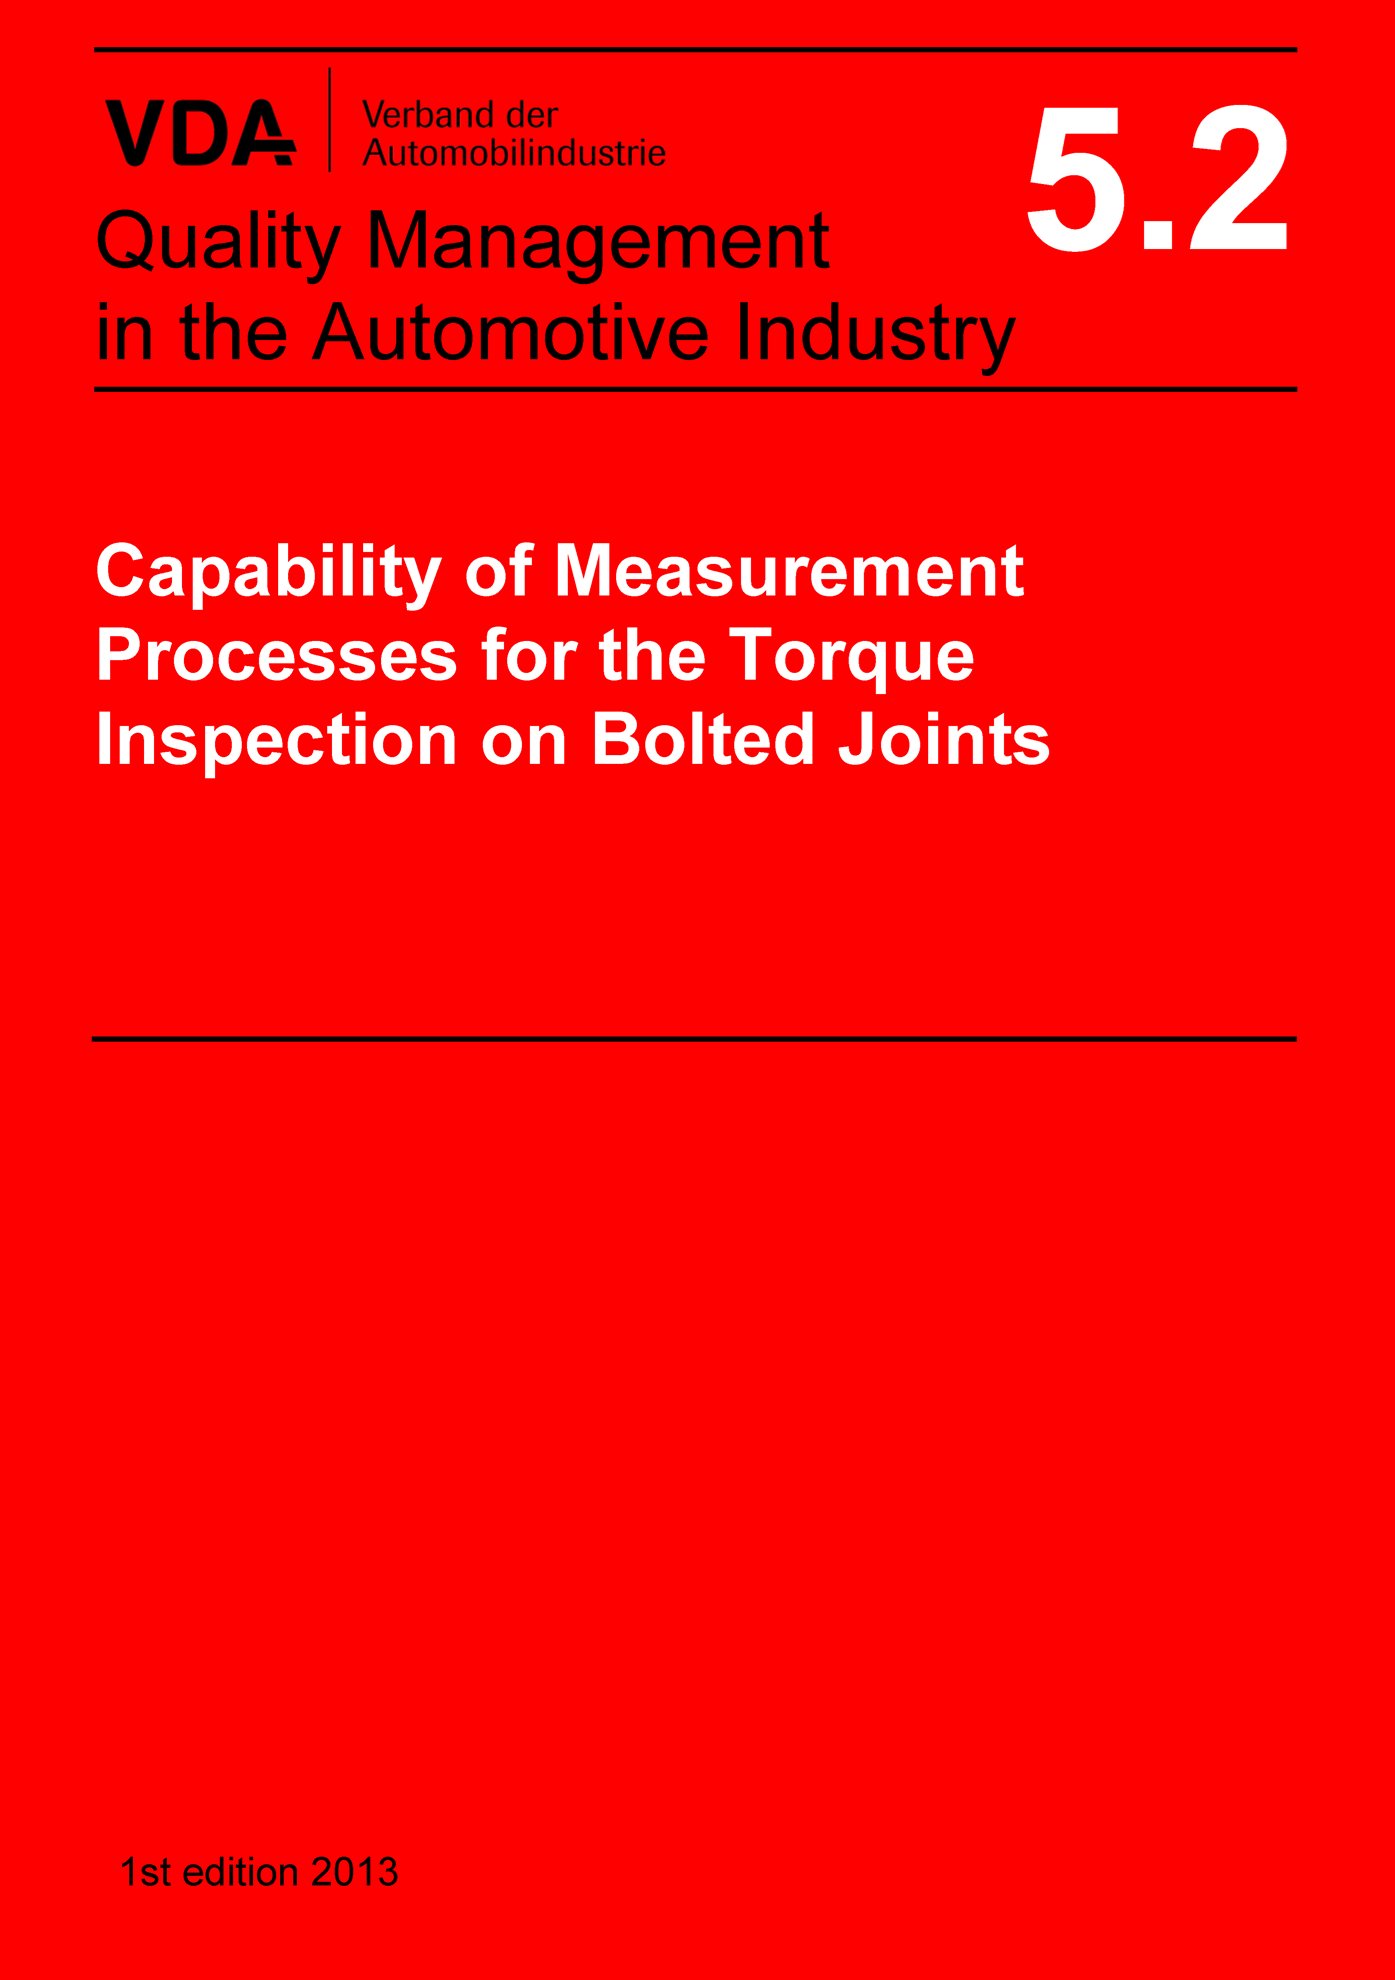 Publikation  VDA Volume 5.2 - Capability of Measurement
 Processes for the Torque Inspection on Bolted Joints, 1st edition 2013 1.1.2013 Ansicht